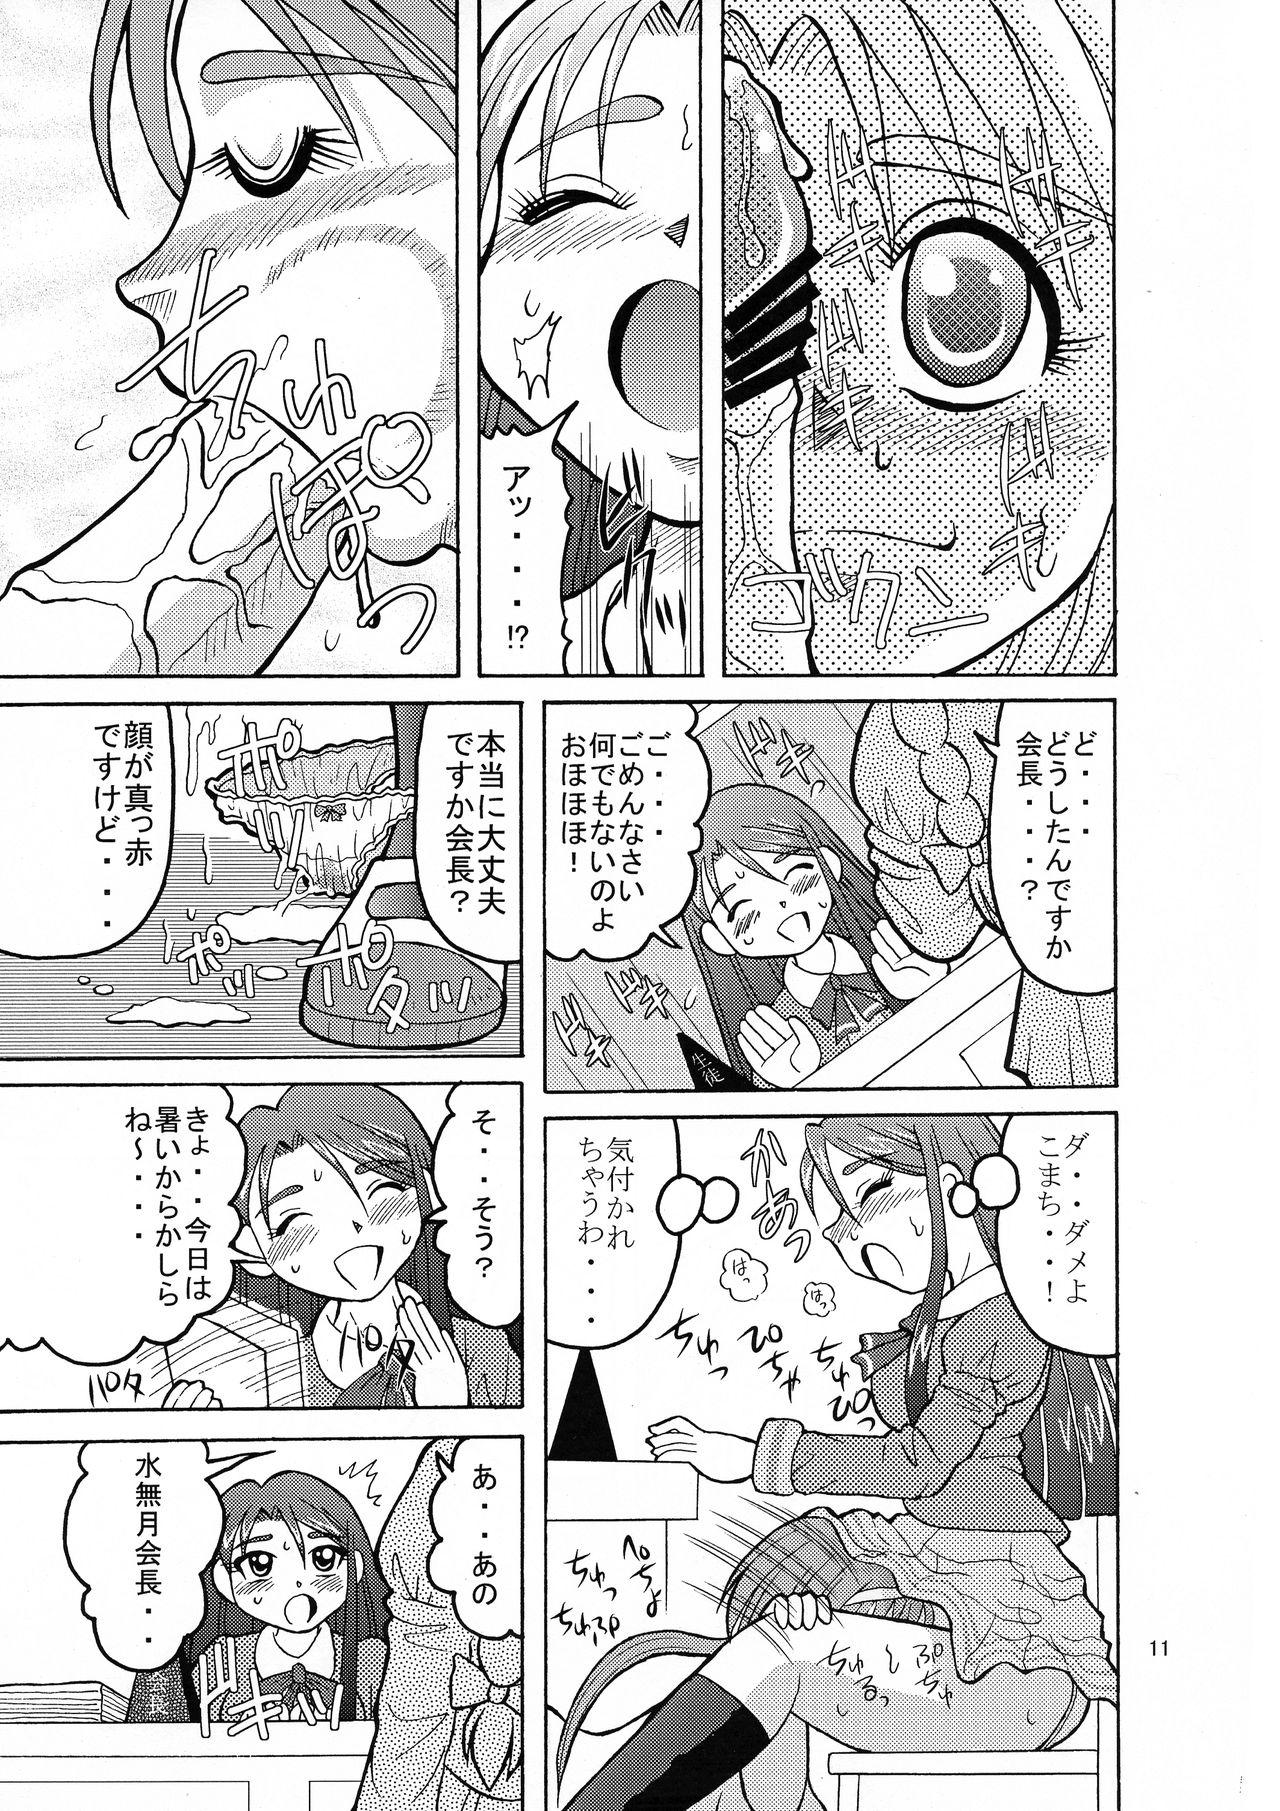 Real Couple Komakare GO! GO! - Yes precure 5 Candid - Page 11